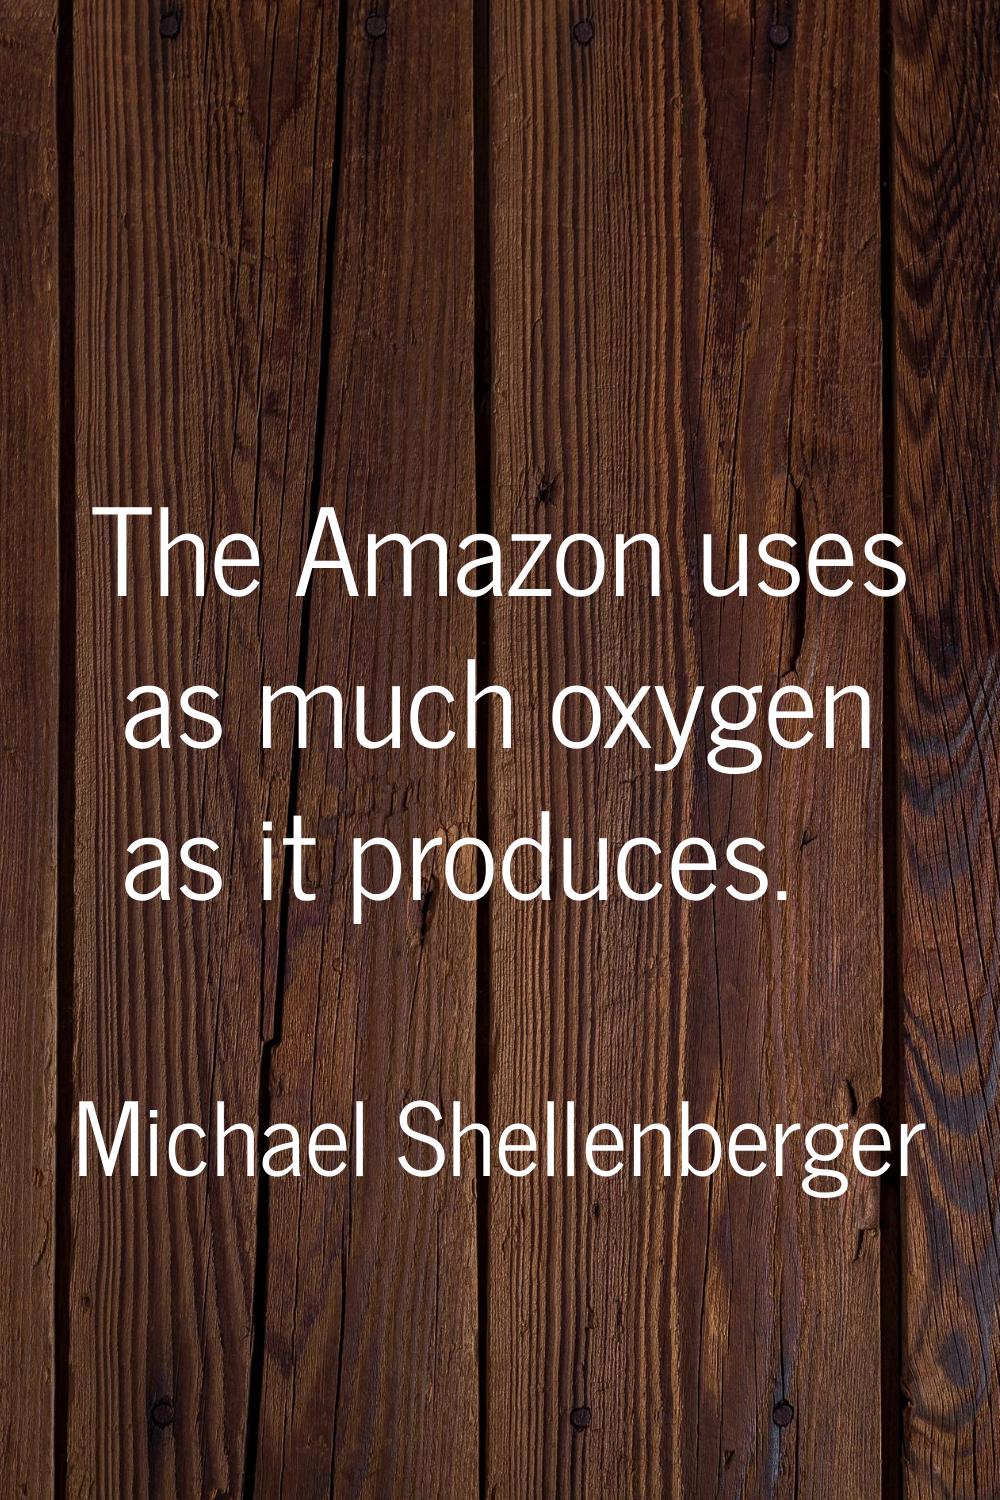 The Amazon uses as much oxygen as it produces.